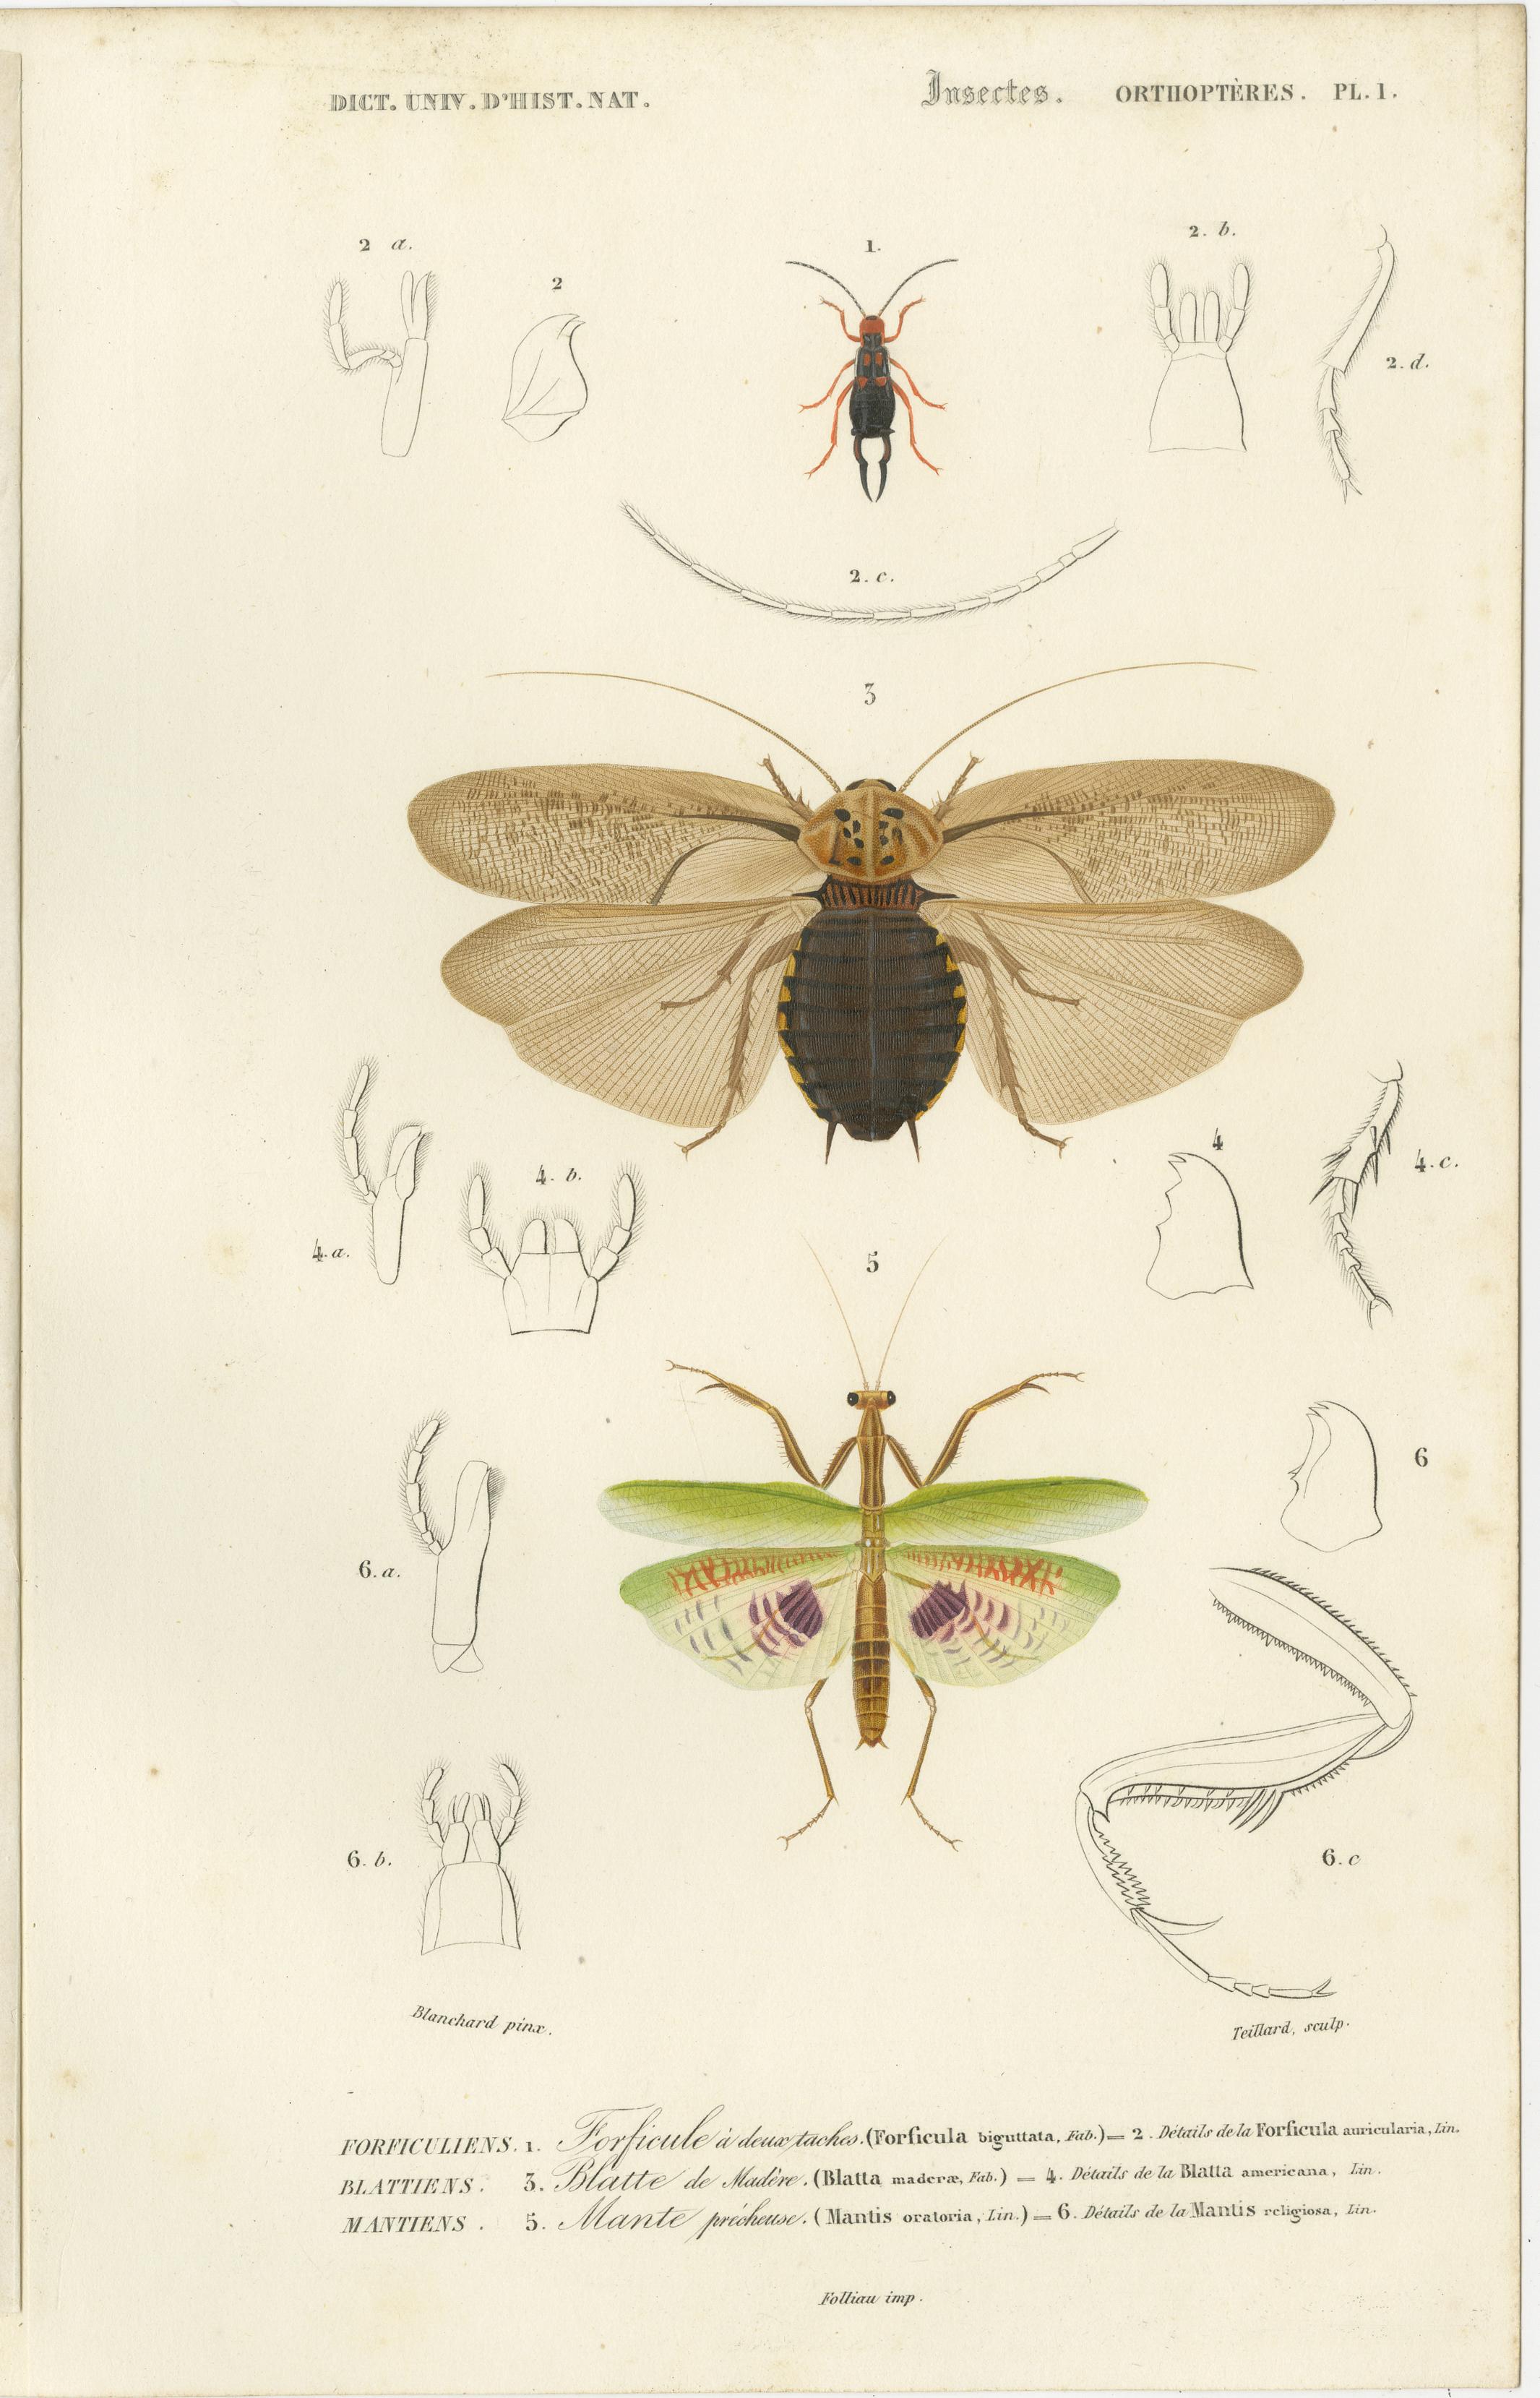 Set of 7 original antique prints of a grasshopper and other insects. These prints originate from 'Dictionnaire universel d'Histoire Naturelle' by d'Orbigny. Published 1861. 

Charles Henry Dessalines d'Orbigny was a French botanist and geologist